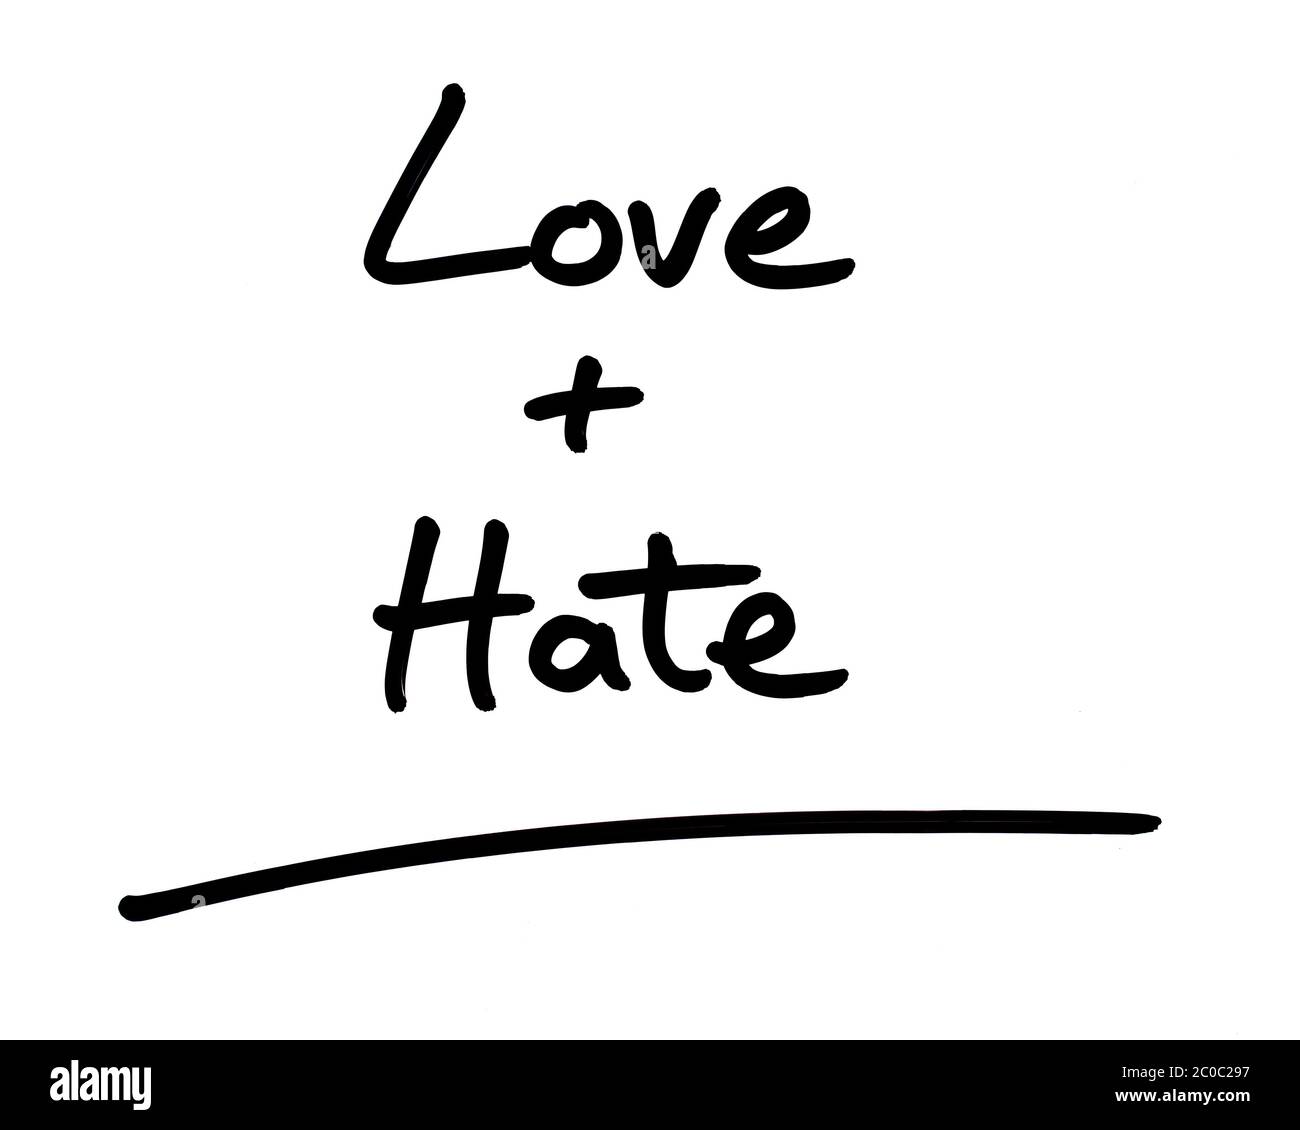 Love and Hate handwritten on a white background. Stock Photo